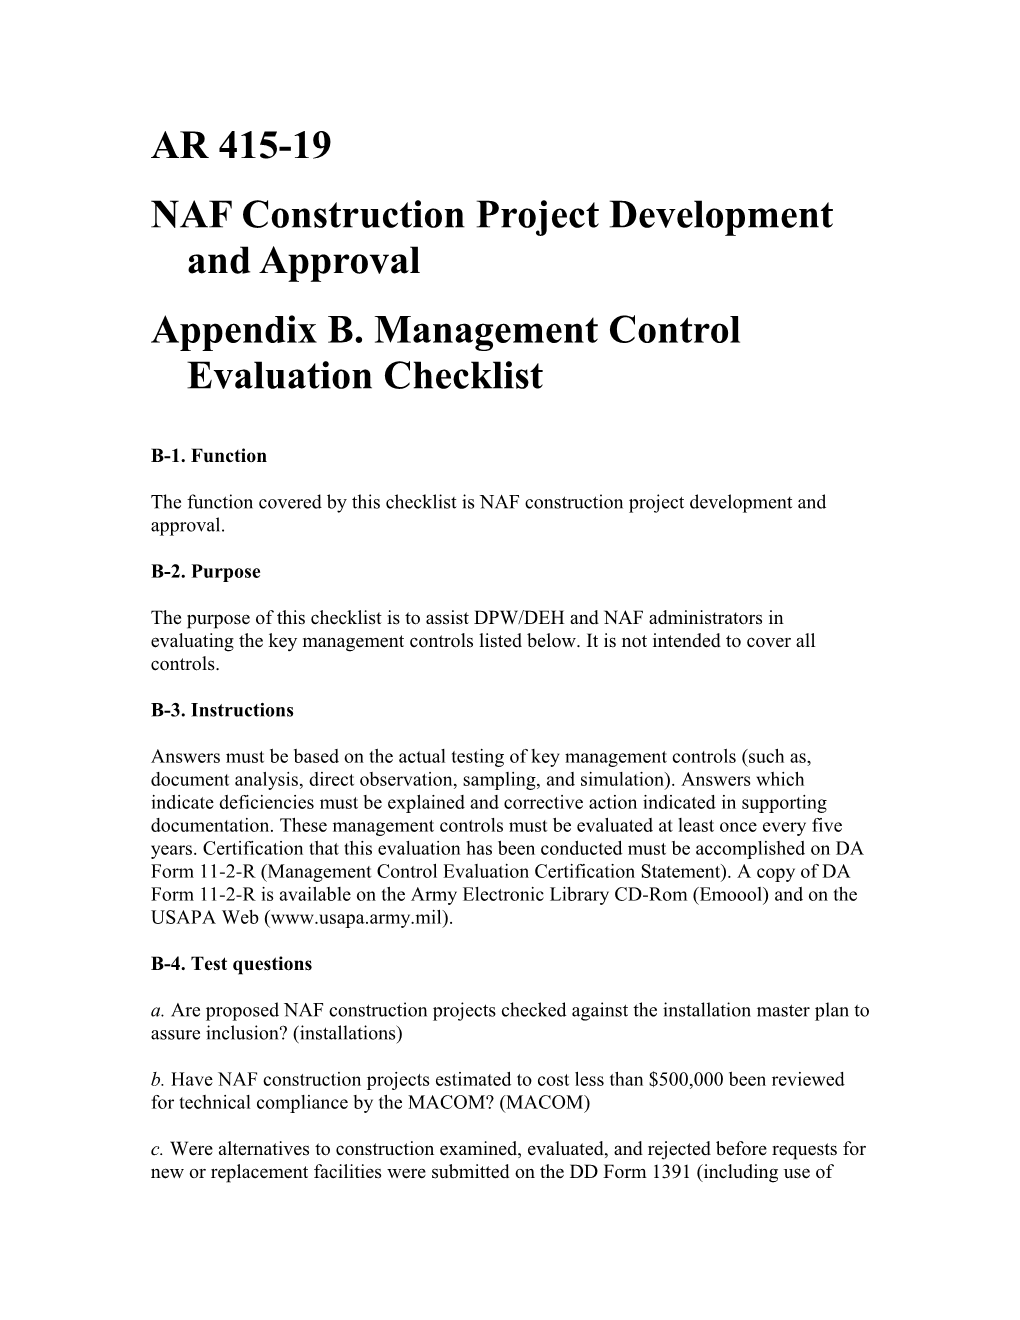 NAF Construction Project Development and Approval